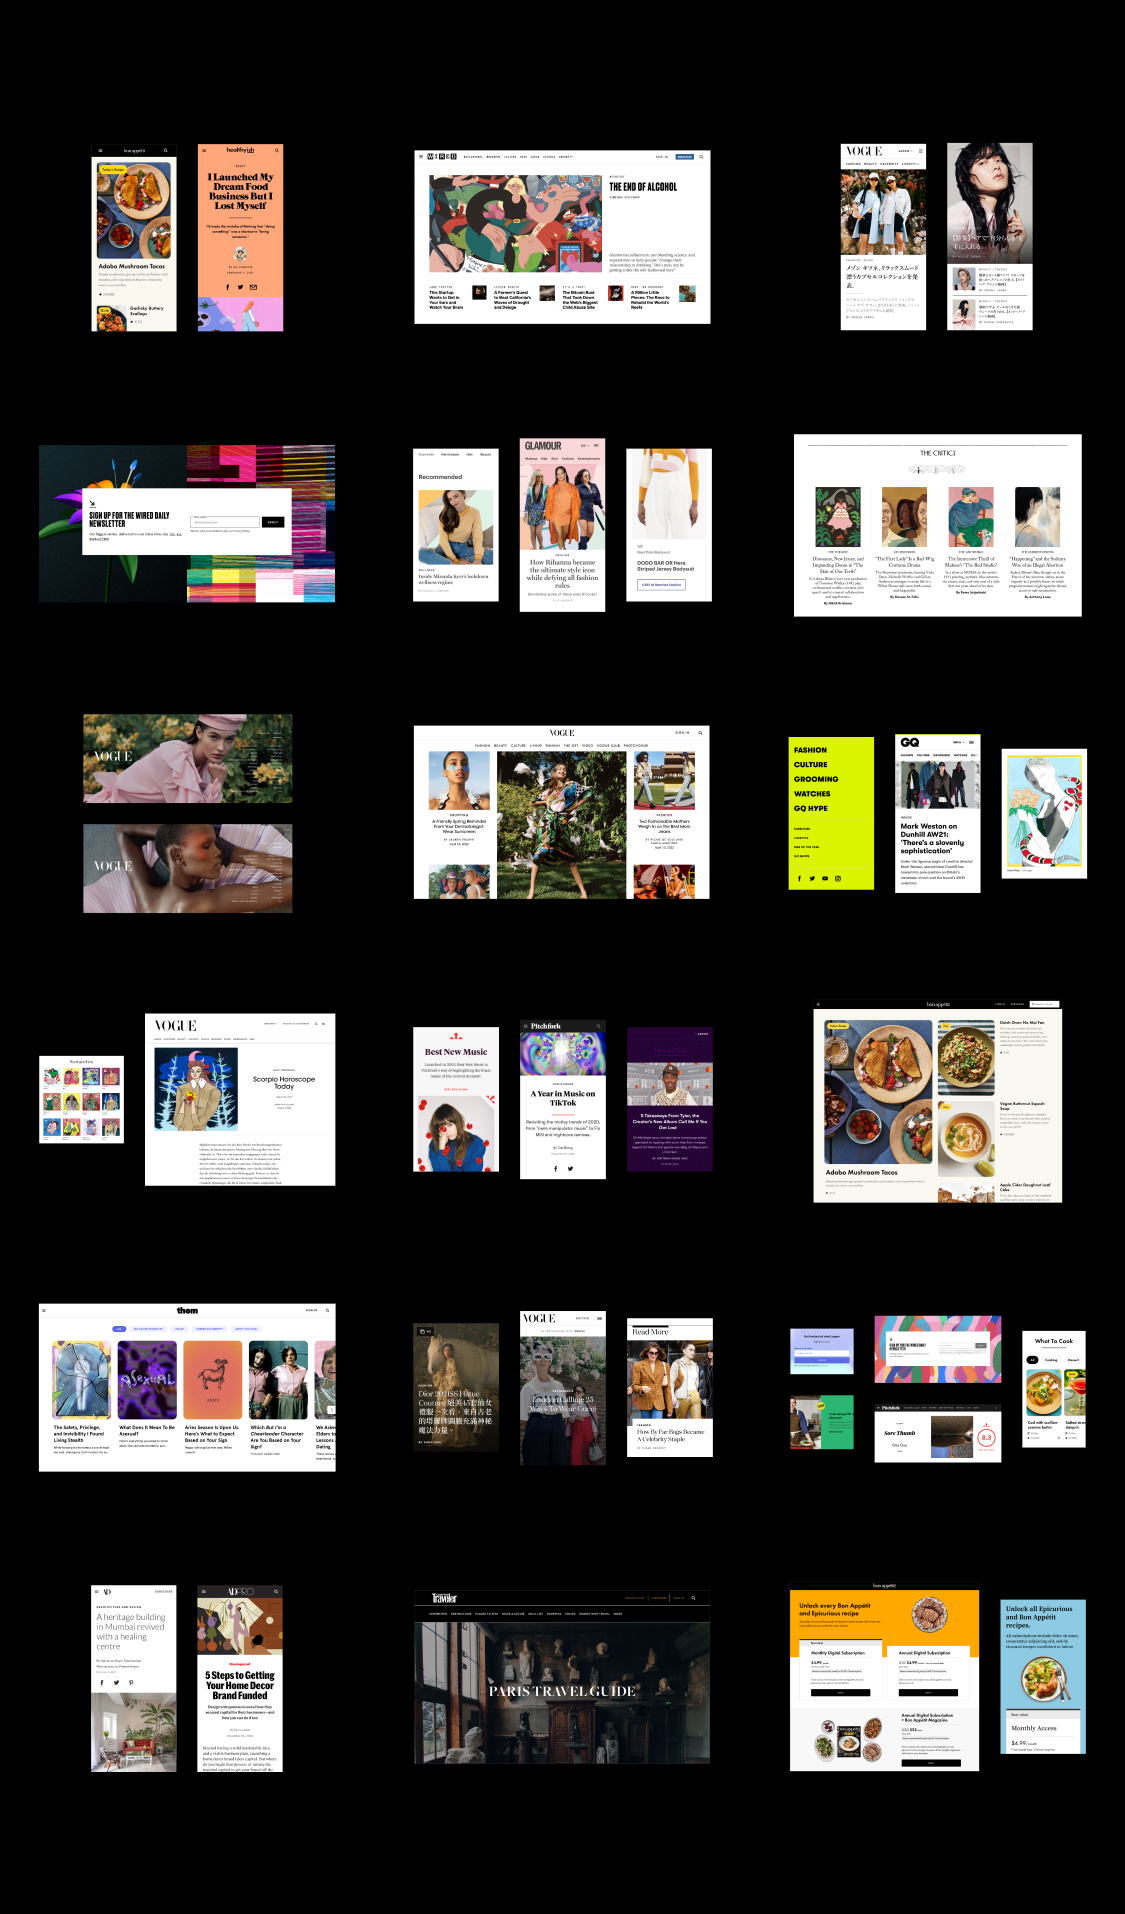 A collage of screenshots from Condé Nast brands such as Vogue, Wired, and The New Yorker